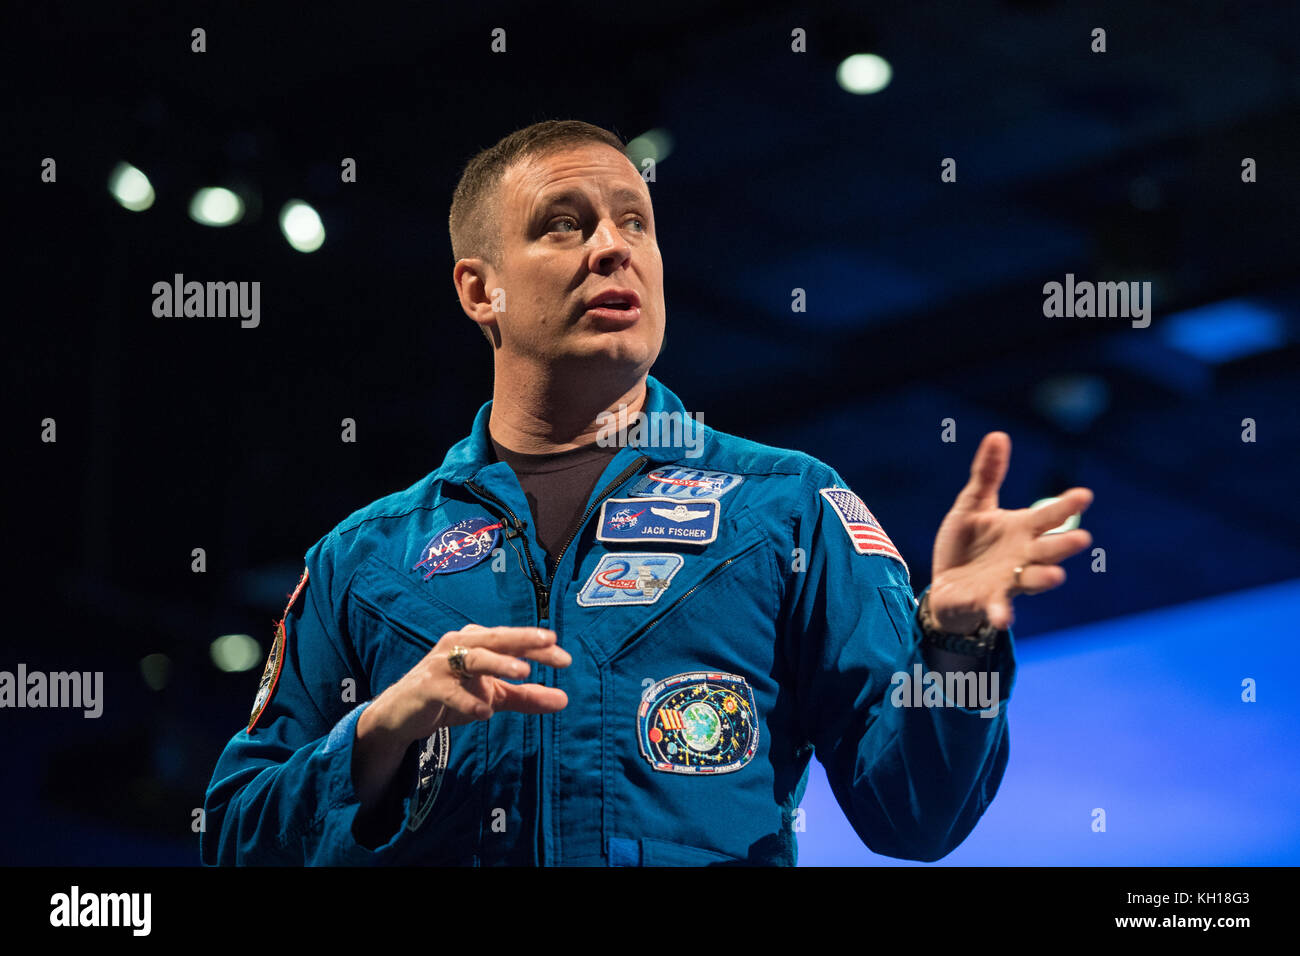 NASA Expedition 51 and Expedition 52 prime crew astronaut Jack Fischer speaks about his time onboard the International Space Station at the Smithsonian National Air and Space Museum November 3, 2017 in Washington, DC.   (photo by Aubrey Gemignani via Planetpix) Stock Photo